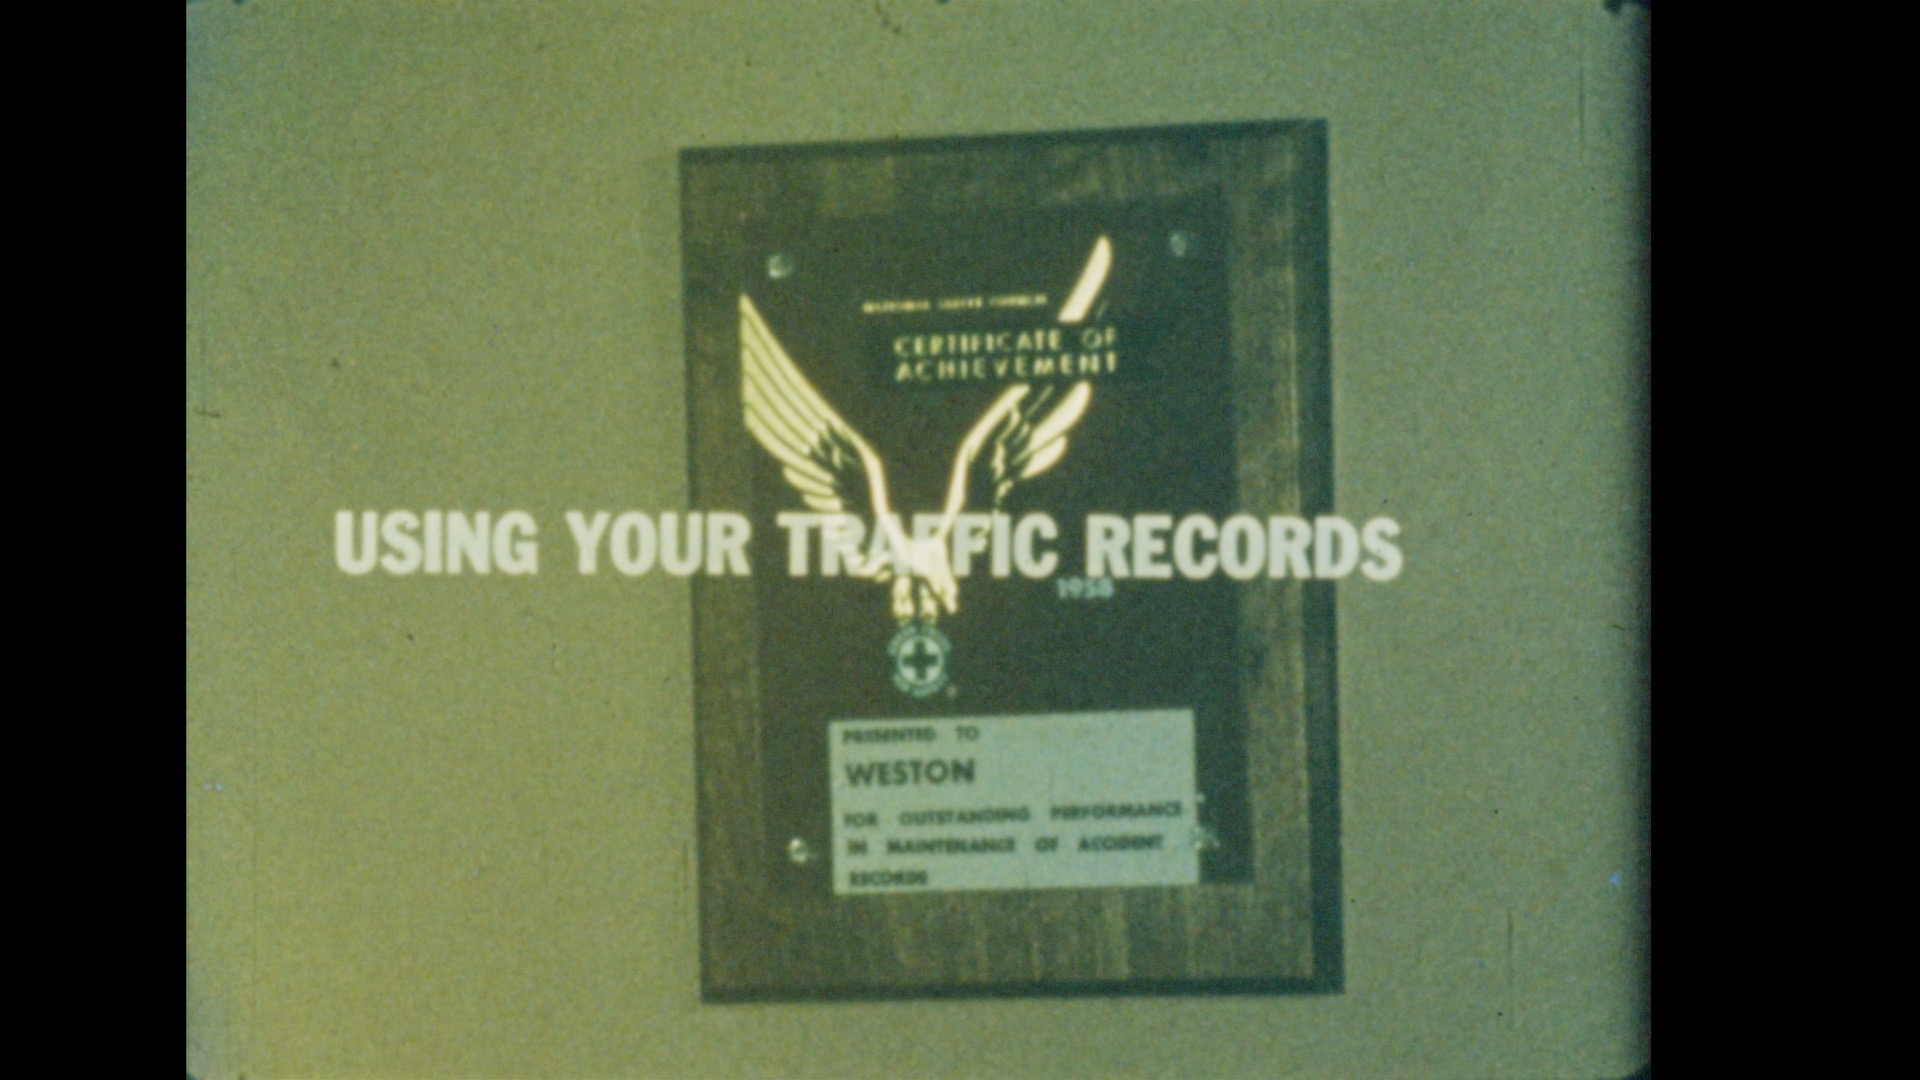 Using Your Traffic Records, circa 1961